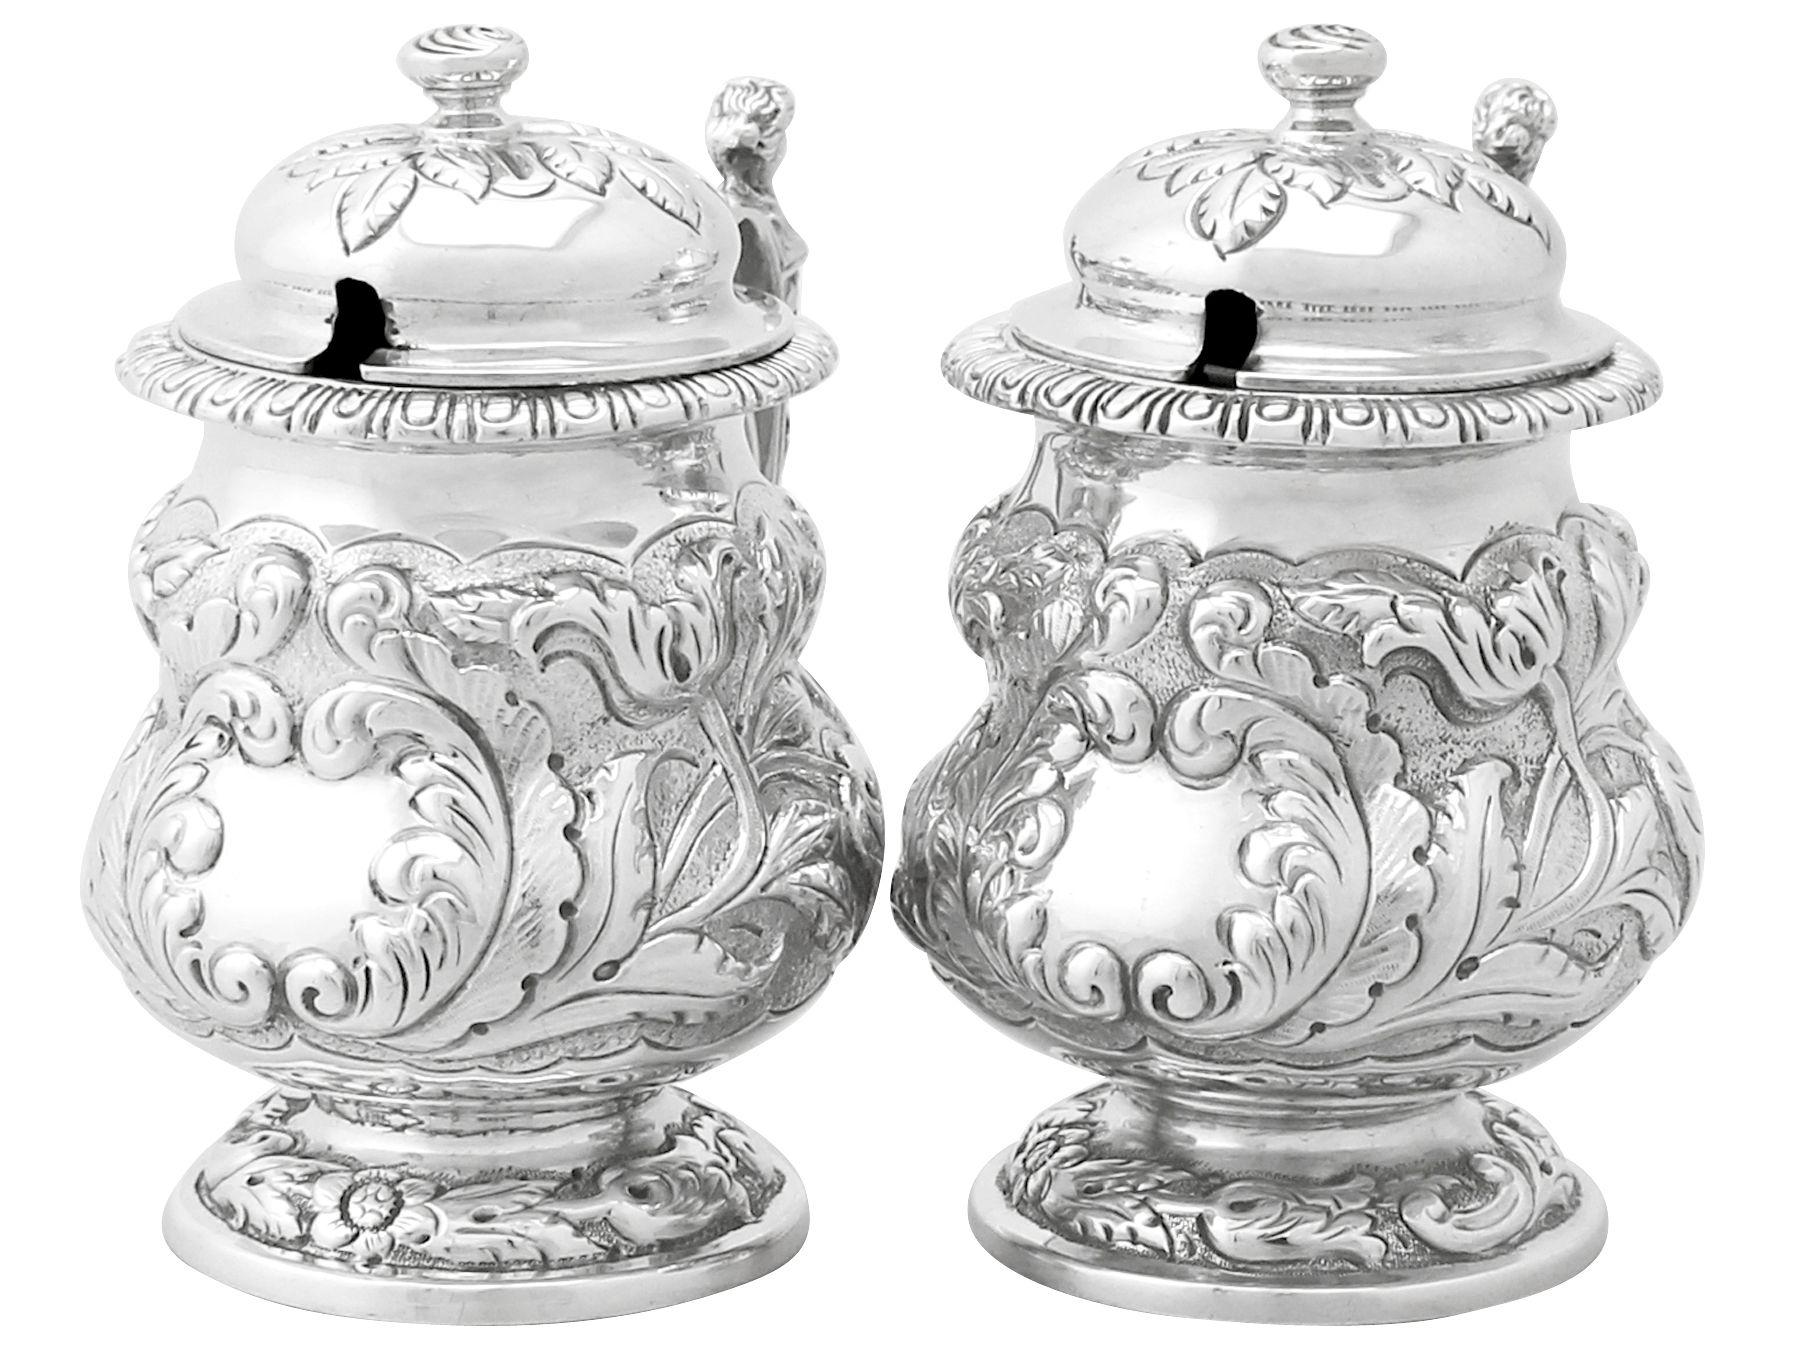 An exceptional, fine and impressive pair of antique George V English sterling silver mustard pots, an addition to our silver cruet and condiments collection.

These exceptional antique George V sterling silver mustard pots have a circular baluster